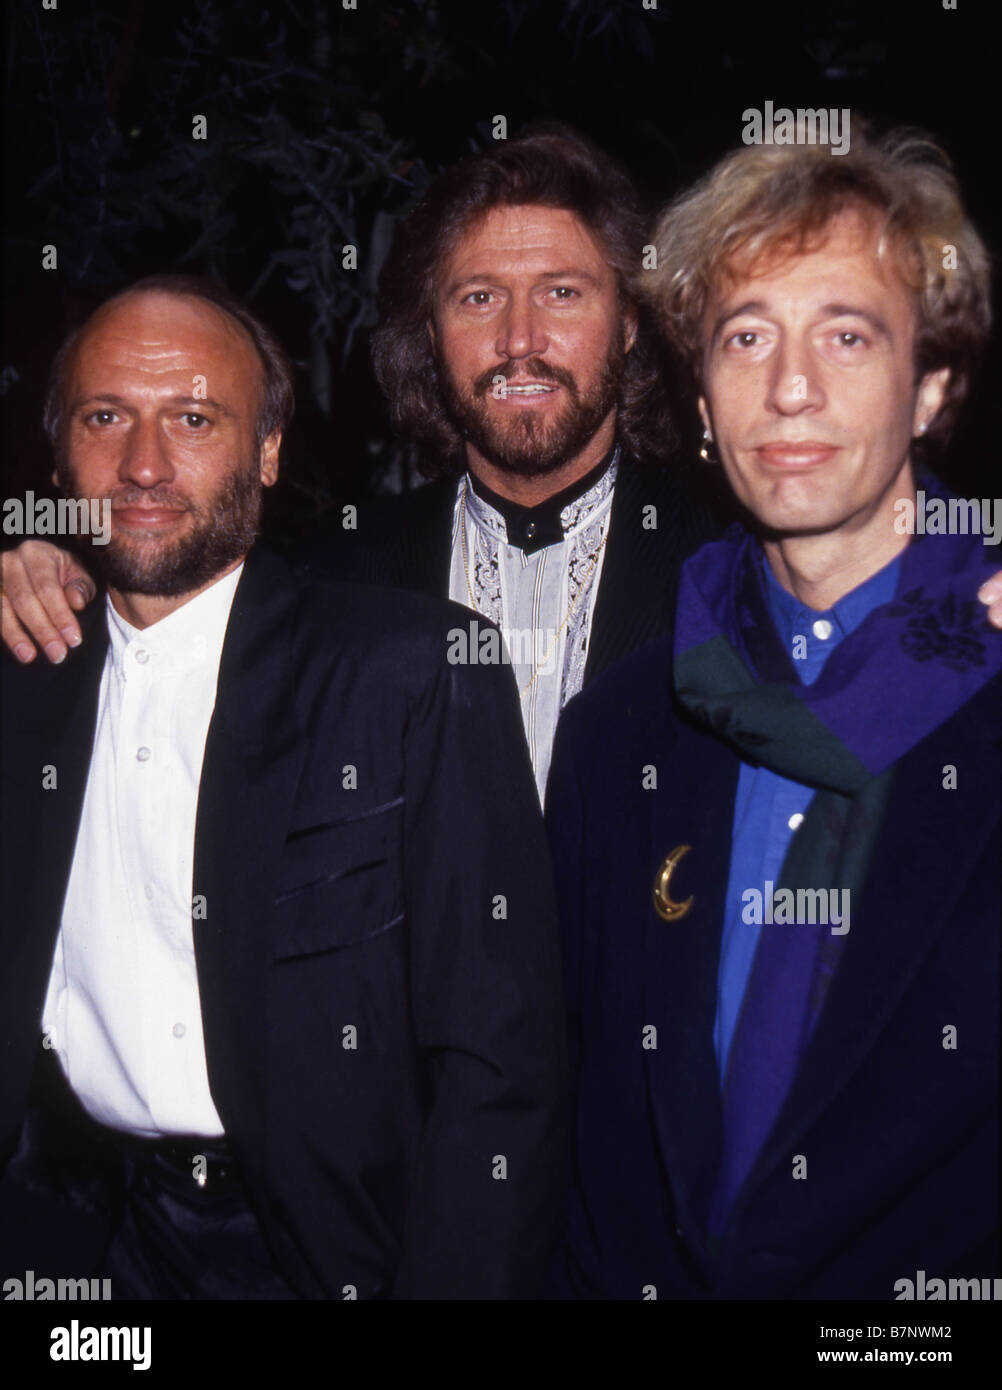 BEE GEES pop group about 1964. From left Maurice, Barry and Robin Gibb Stock Photo